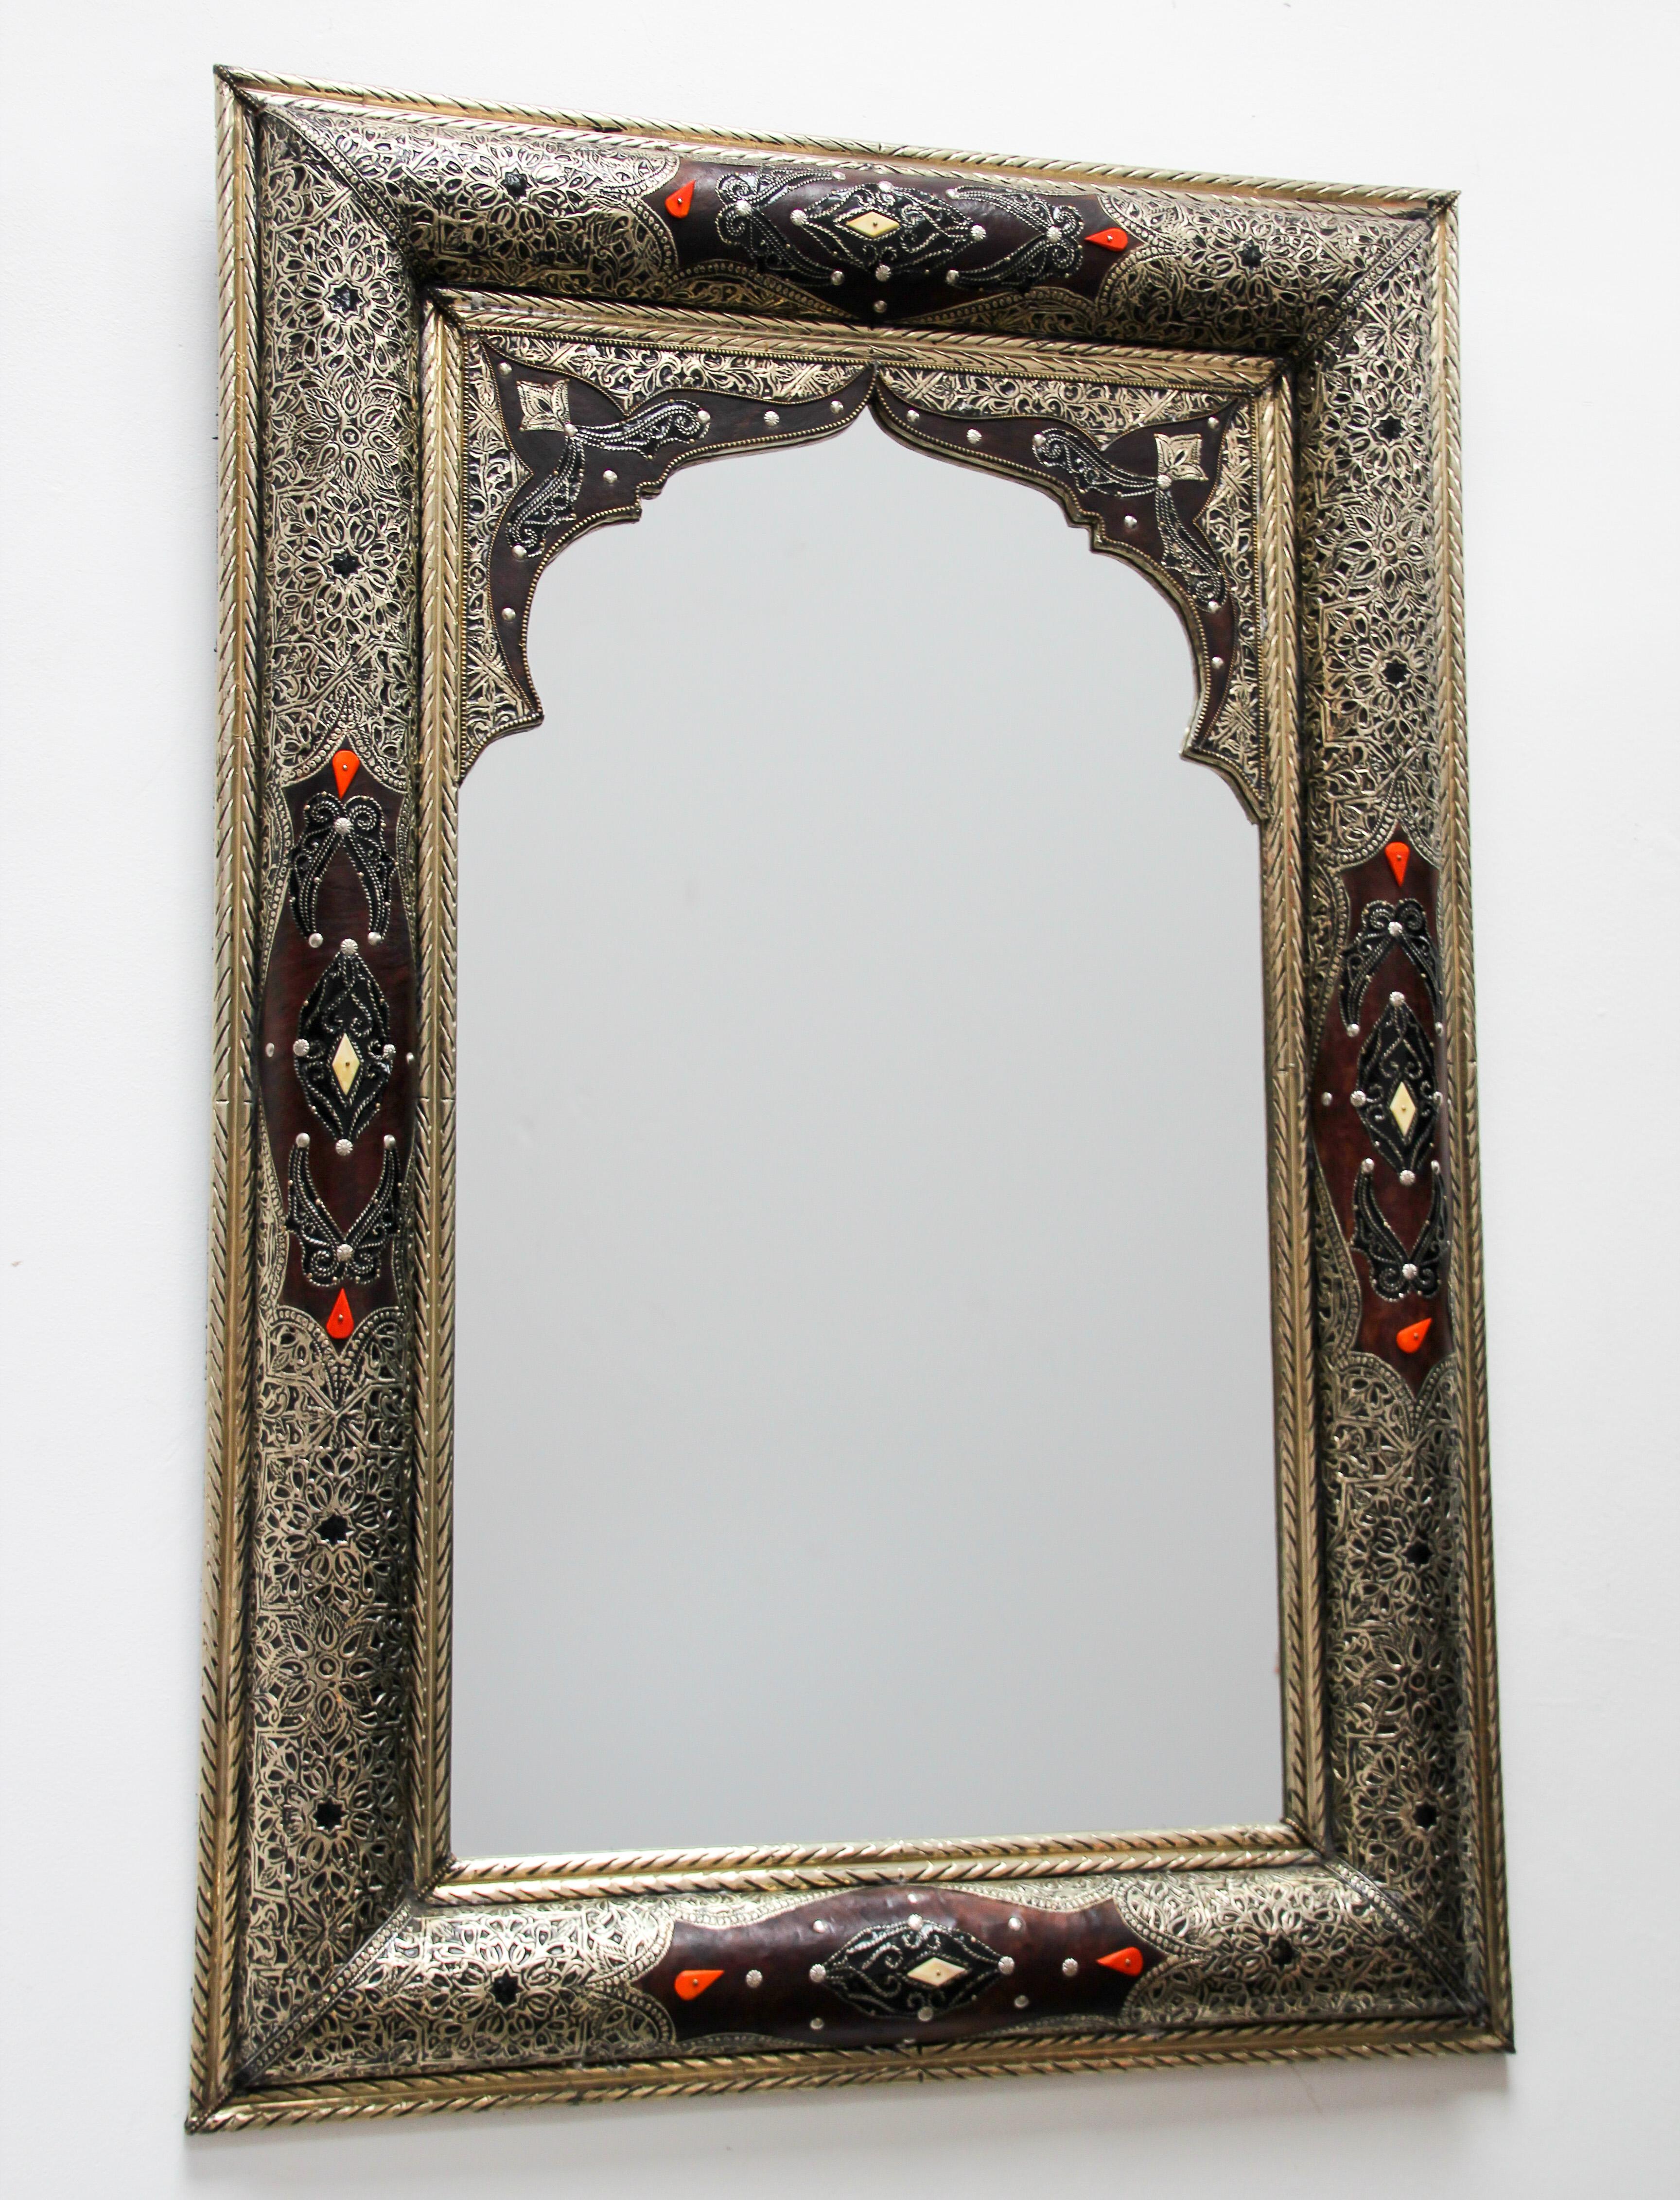 Pair of elegant Moroccan mirrors decorated with silvered repousse metal delicately engraved and wrapped with leather and amber color stones.
The inside mirror has a Moorish arch in leather and fine filigree silver décor.
Handcrafted rectangular